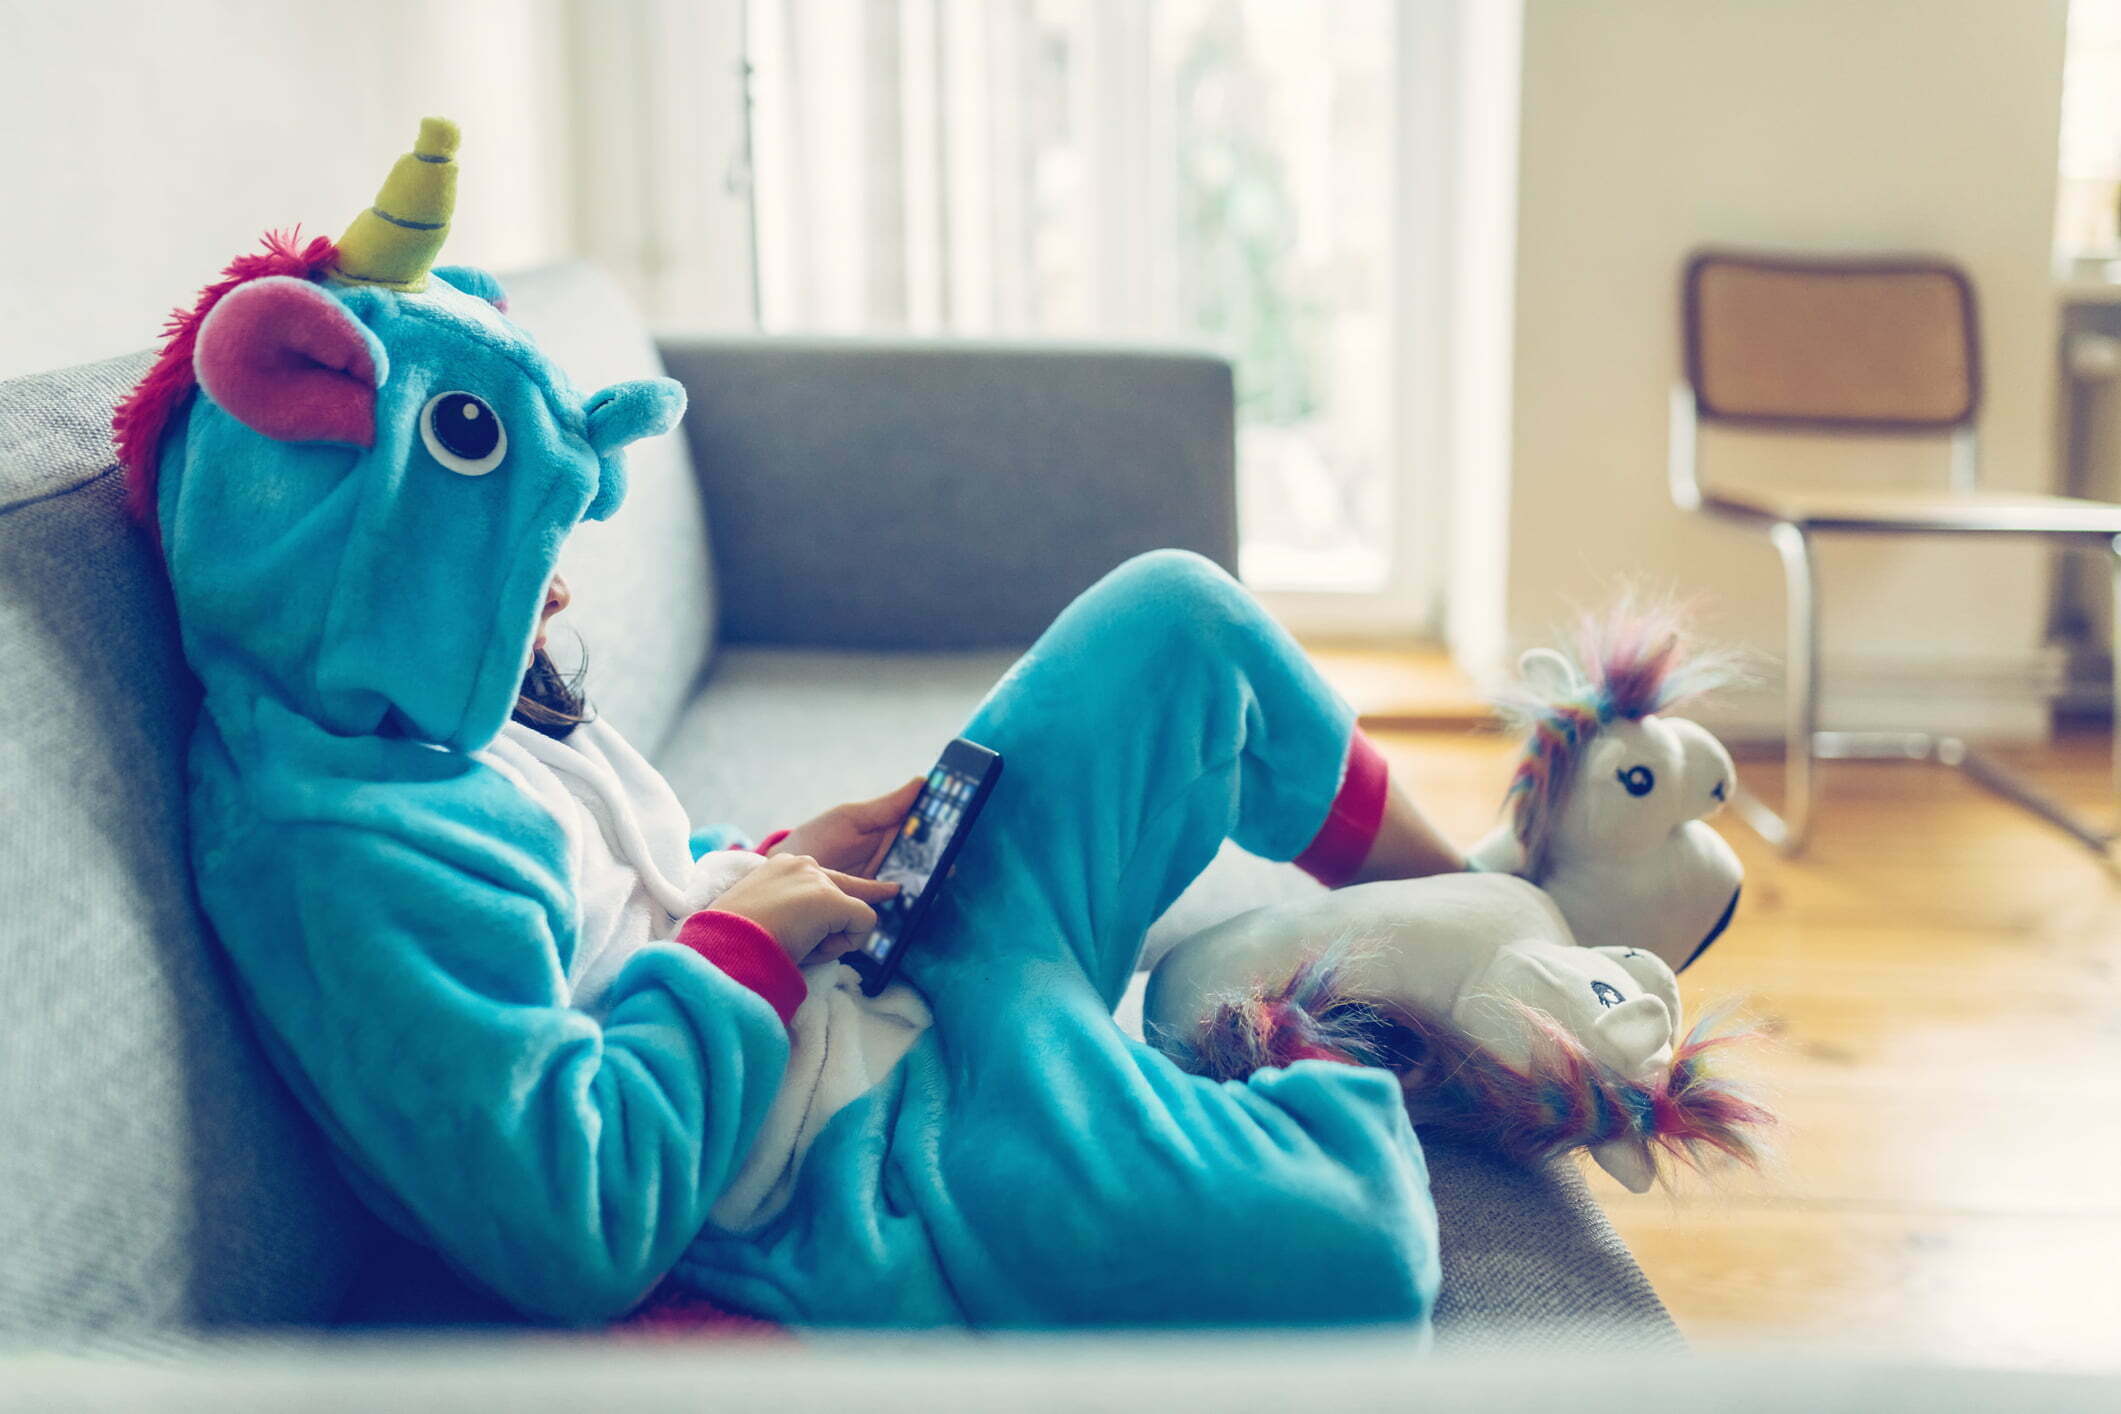 little girl in unicorn costume relaxing with mobile on couch at home